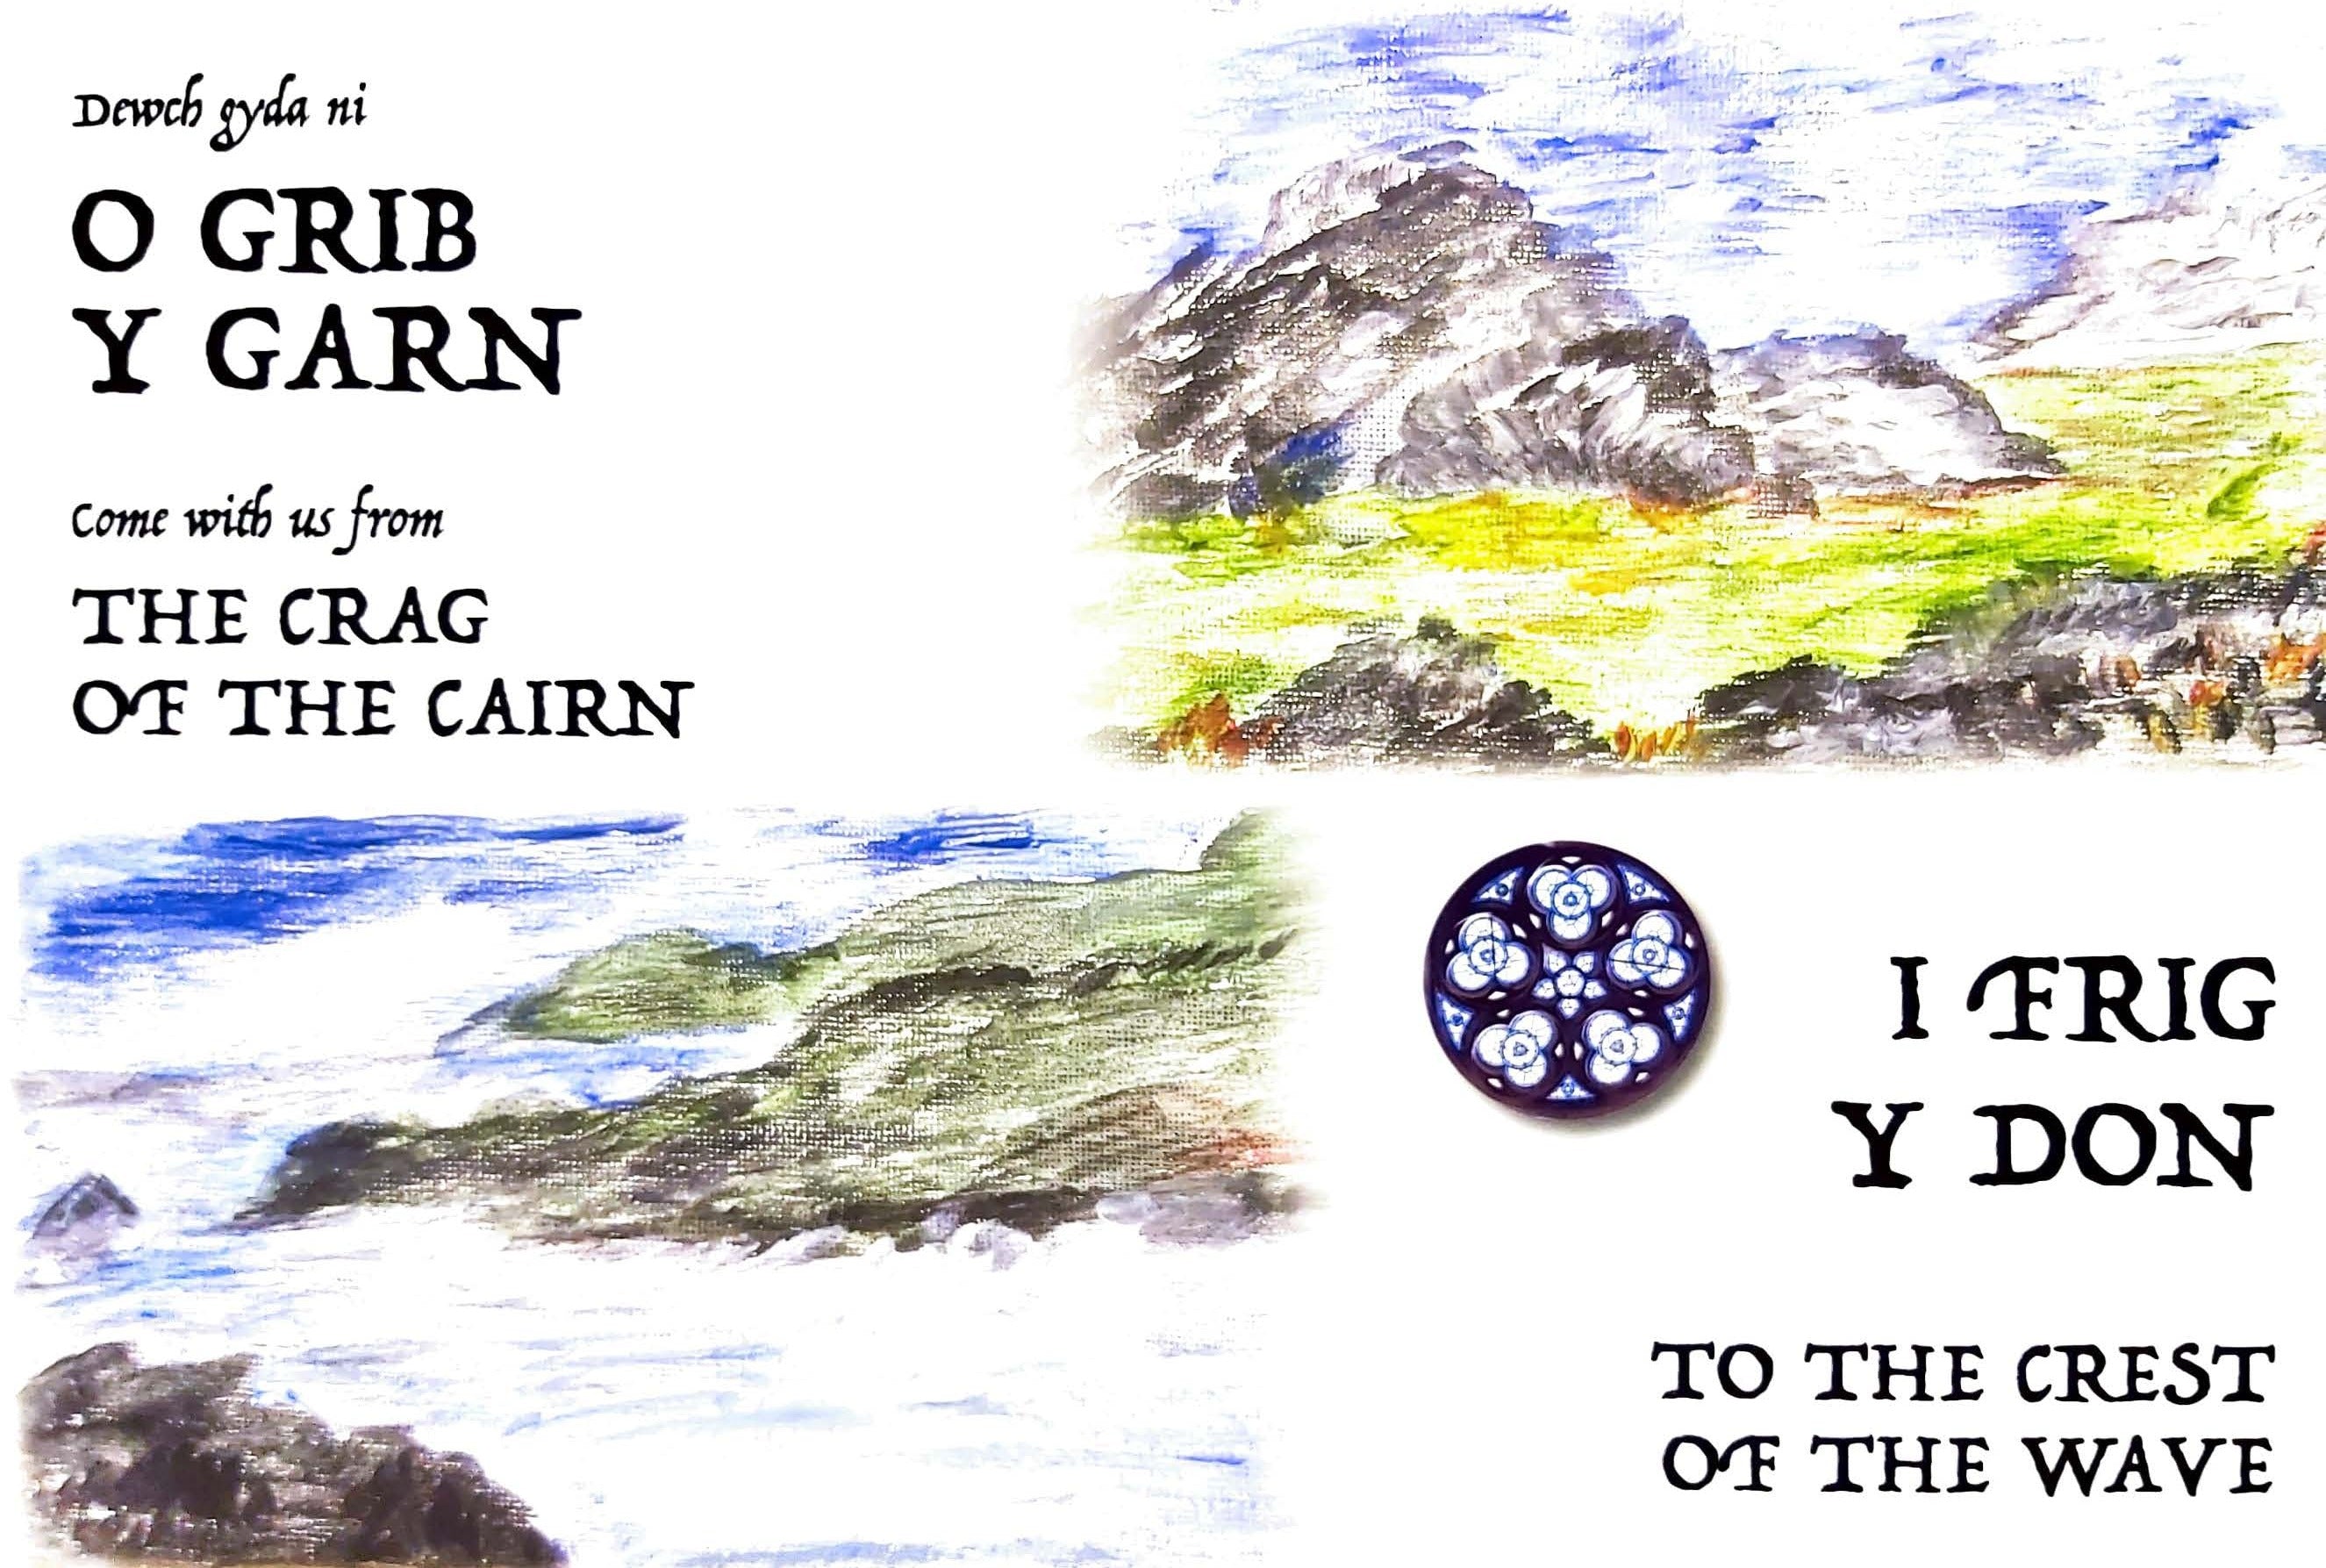 O Grib y Garn i Frig y Don / From the Crag of the Cairn to the Crest of the Wave